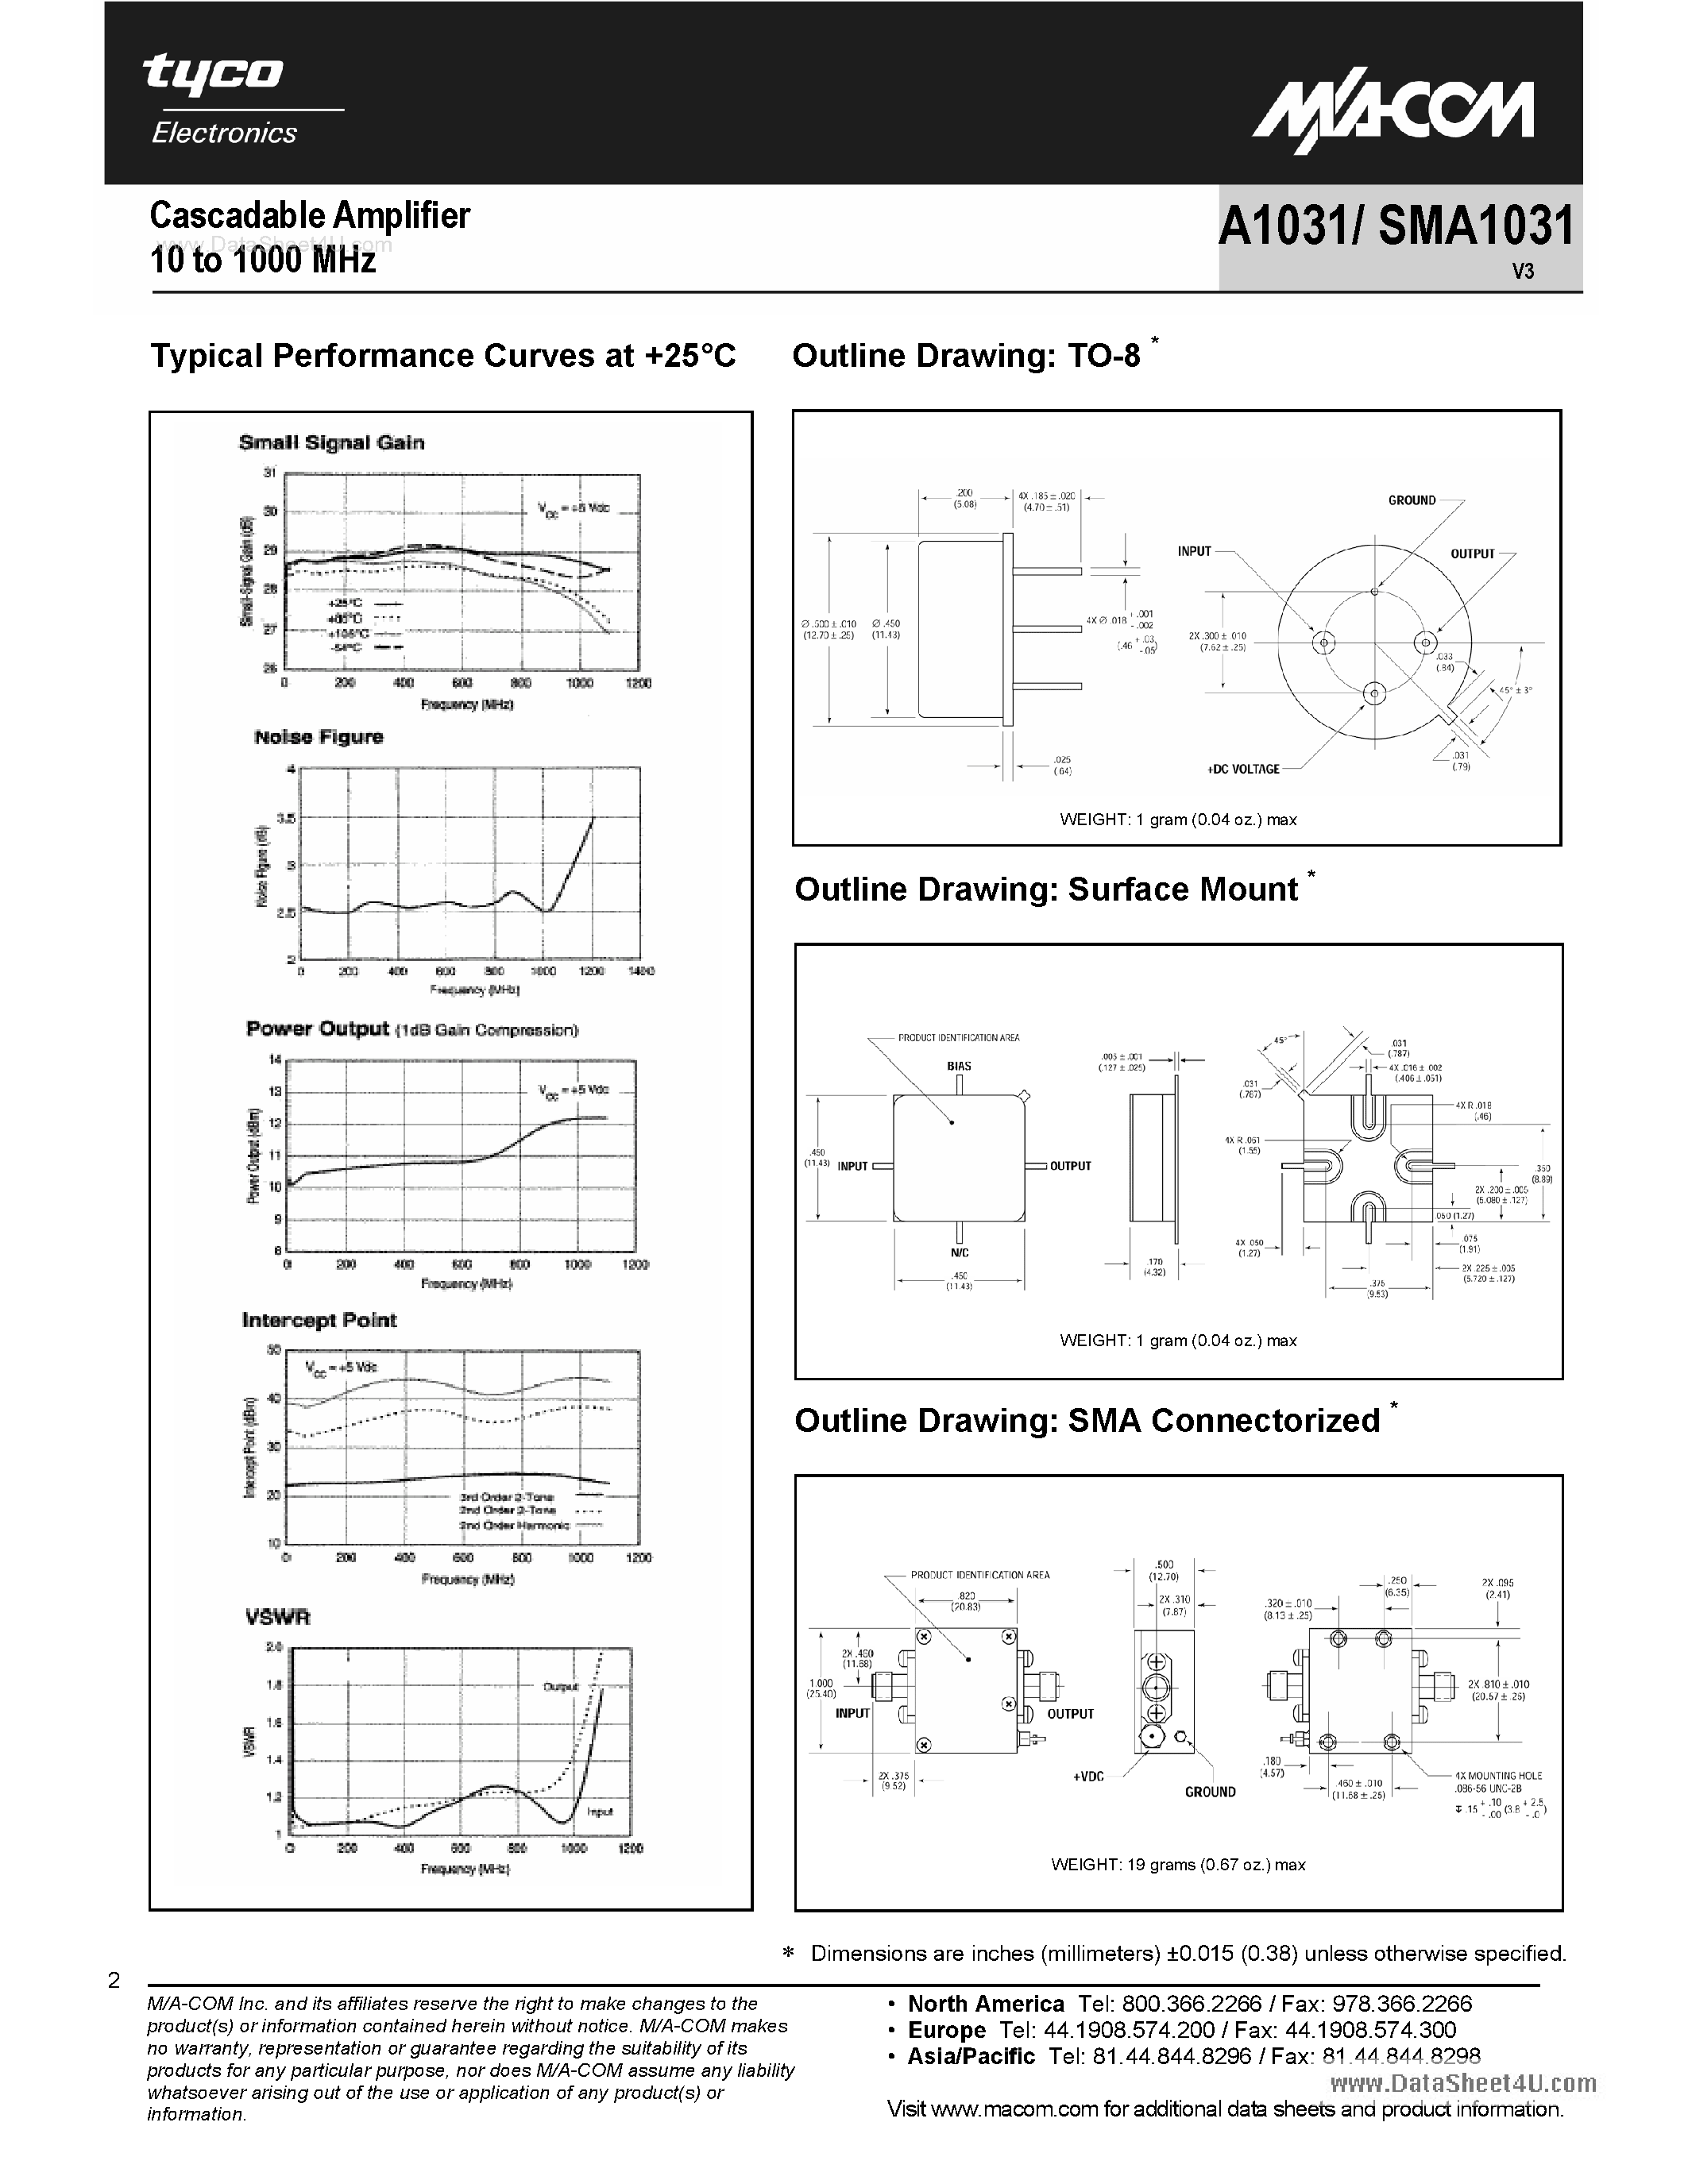 Datasheet CA1031 - Cascadable Amplifier 10 to 1000 MHz page 2